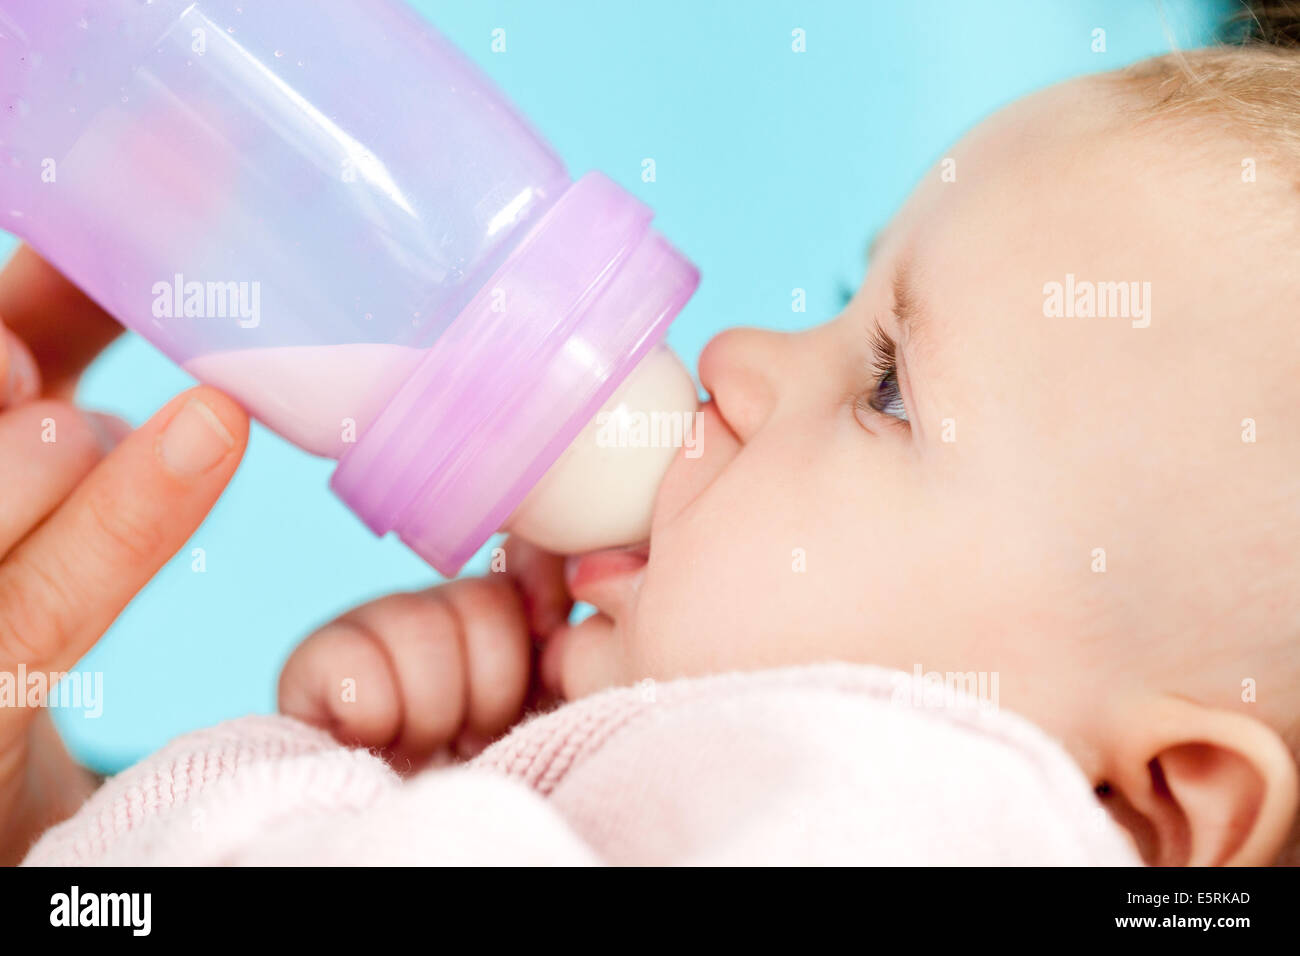 5 month old baby with feeding bottle 